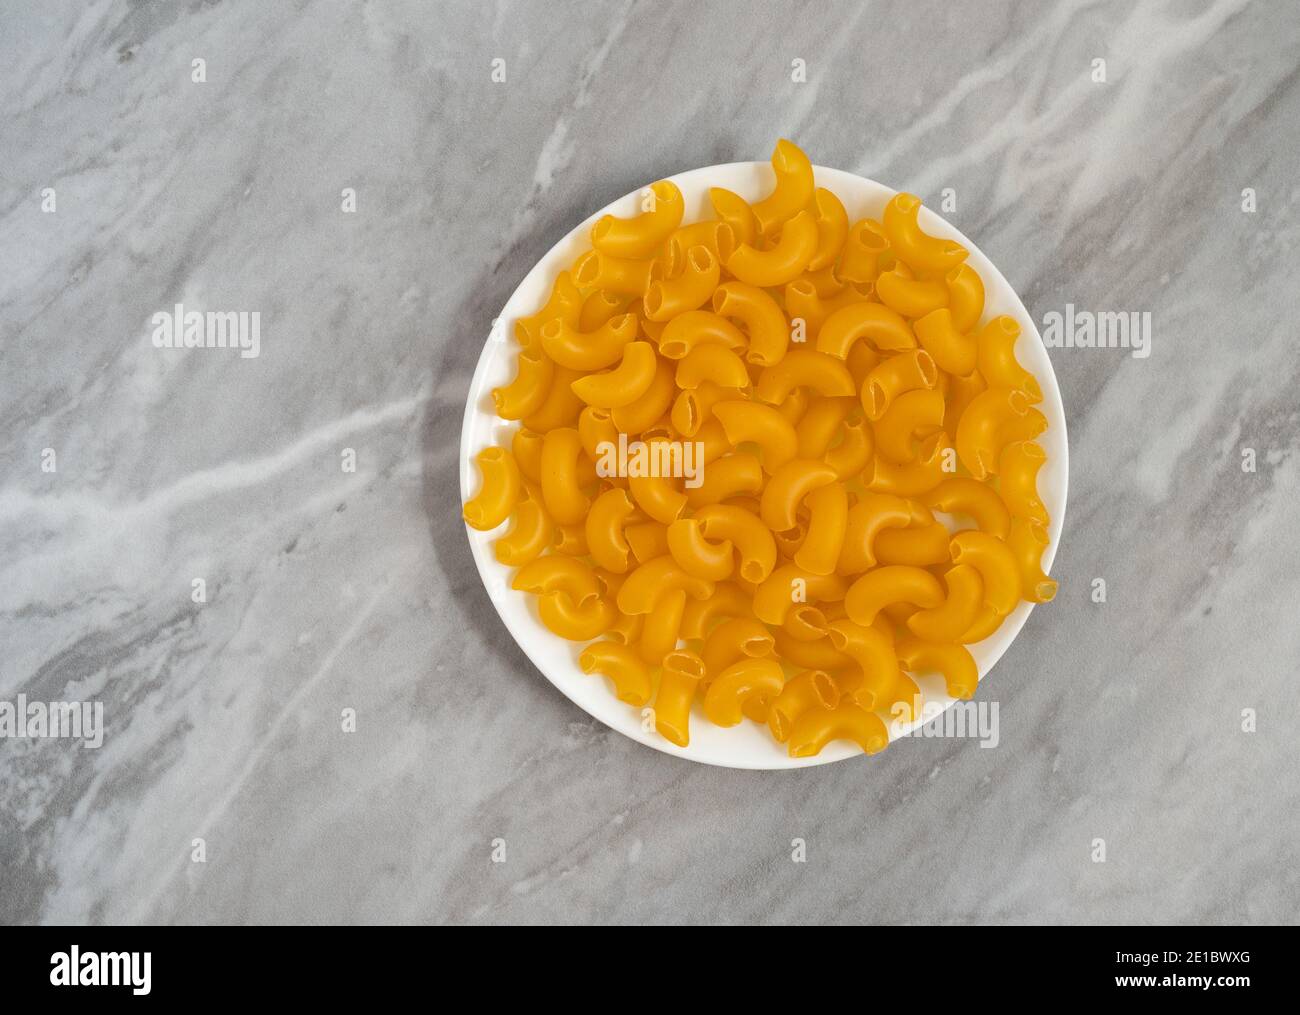 Organic elbow macaroni on a white plate atop a gray countertop illuminated with natural light. Stock Photo